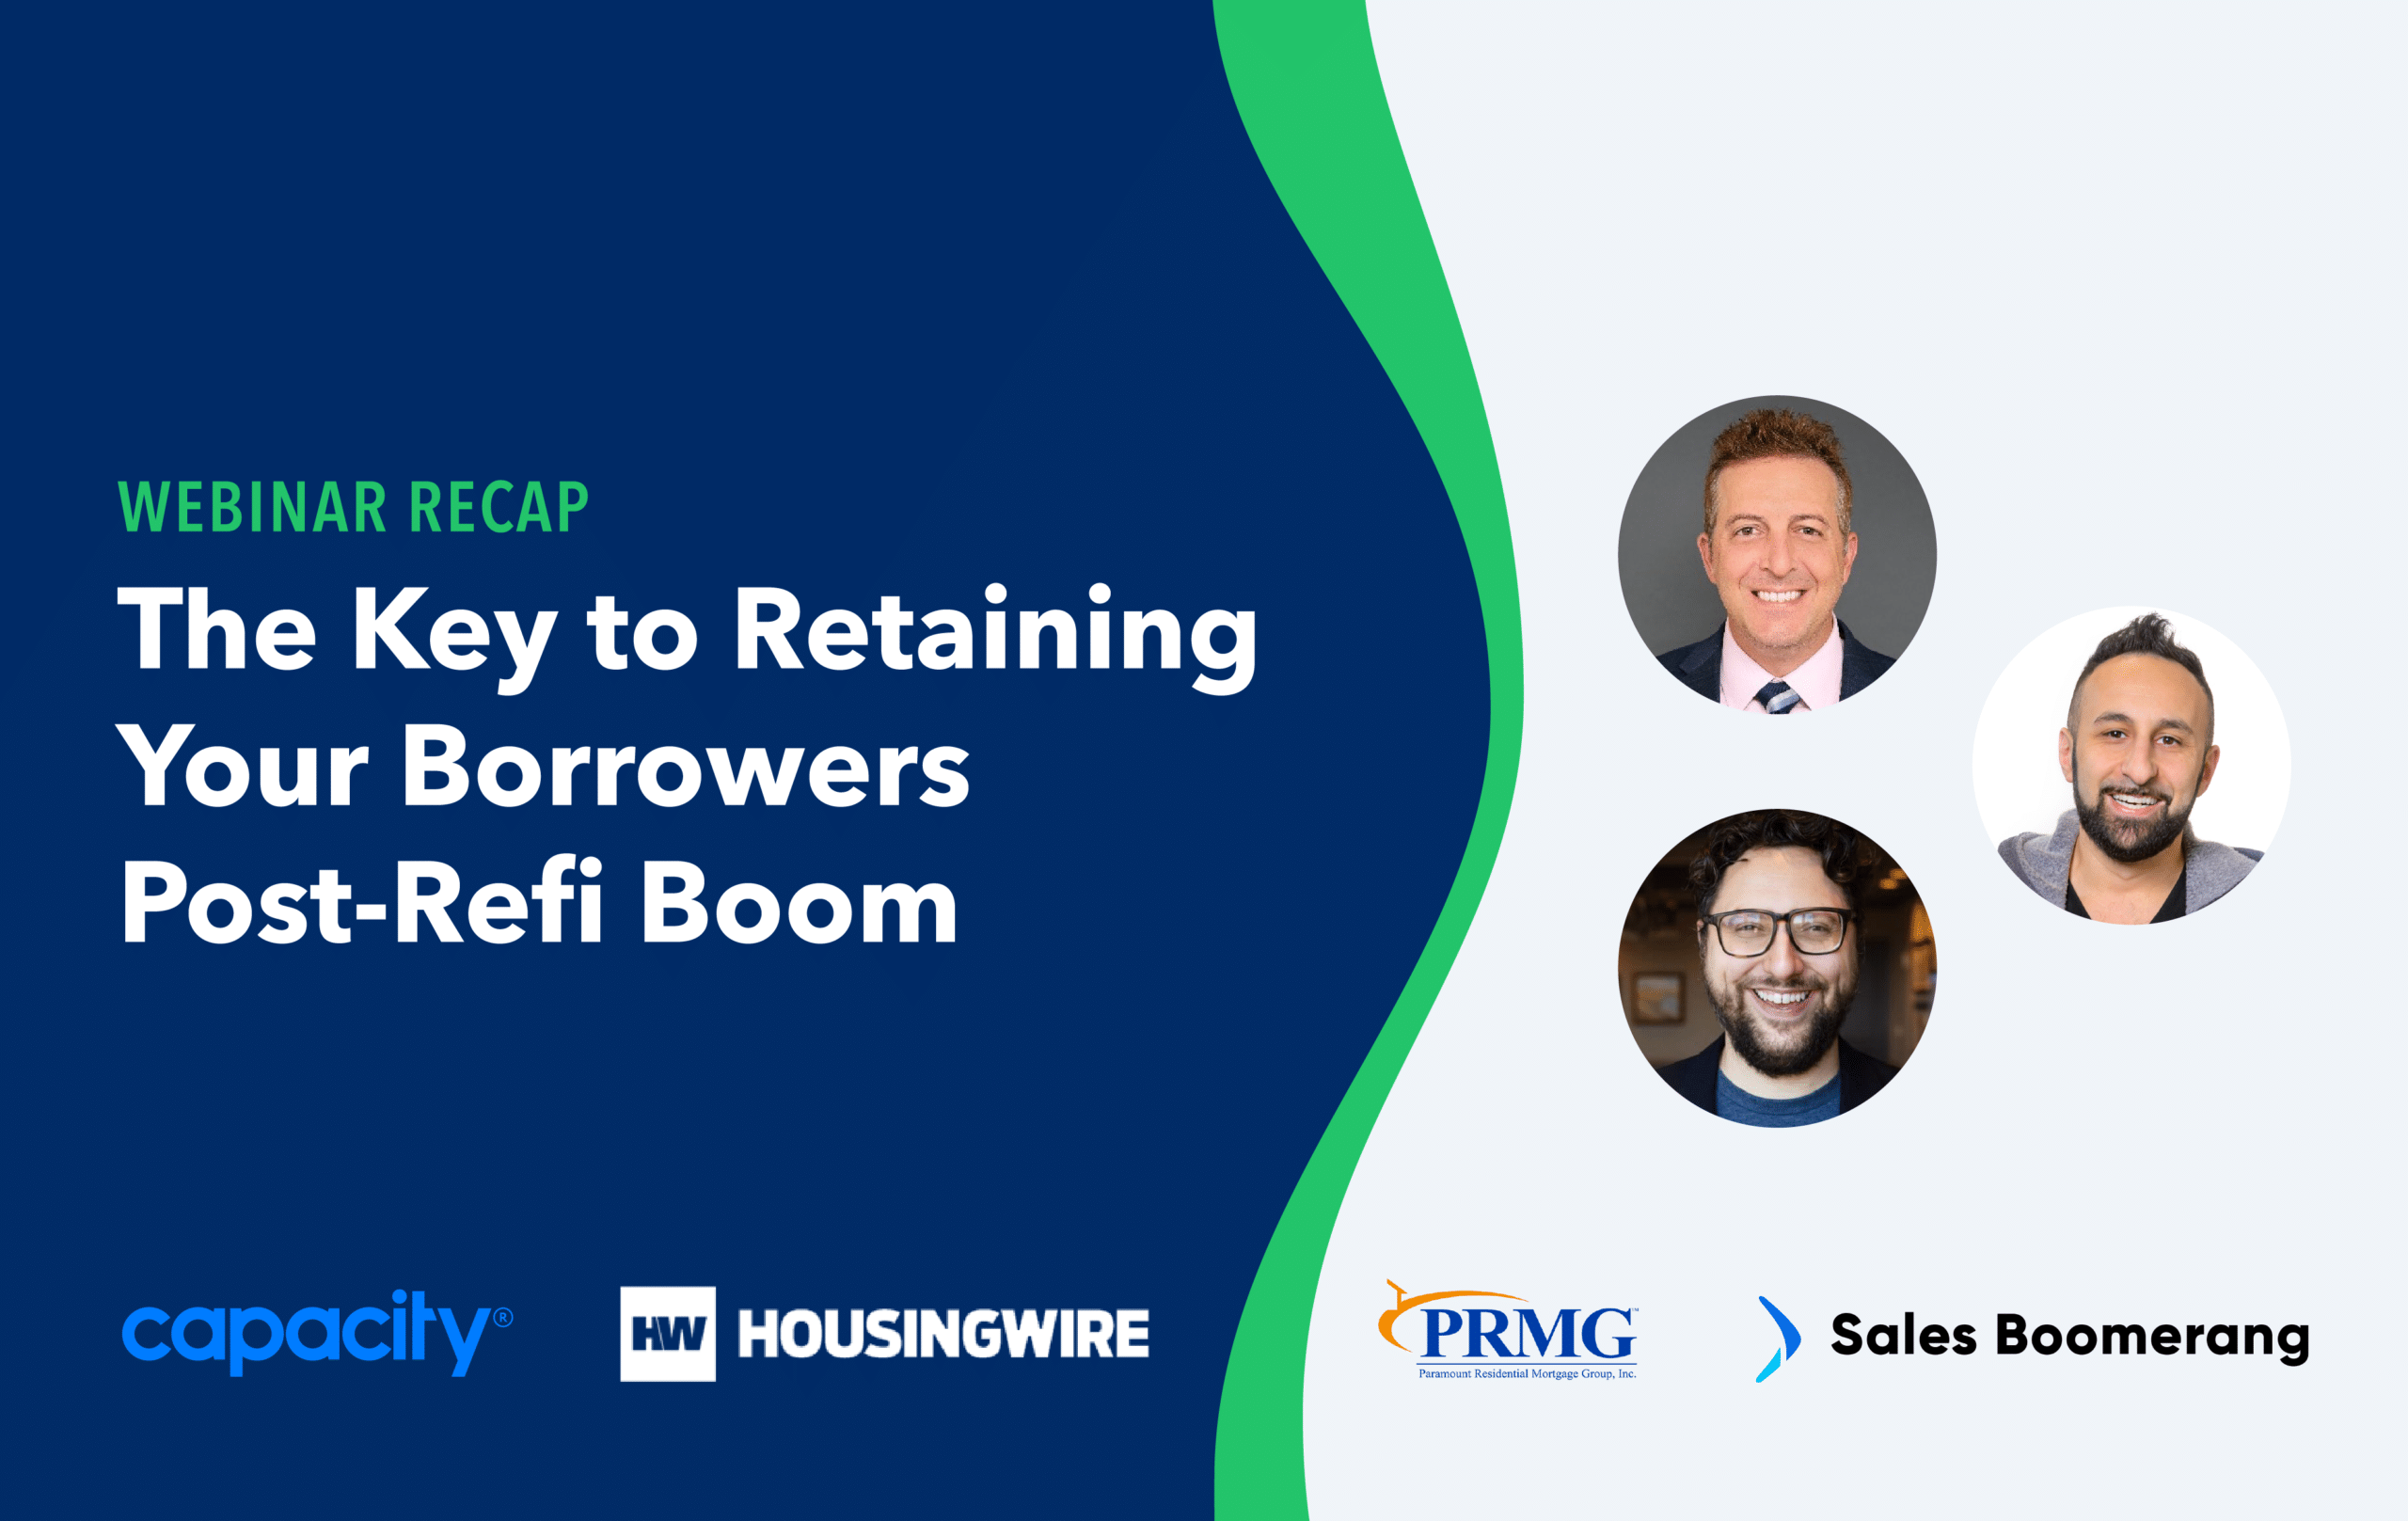 Three Questions Answered: The Key to Retaining Your Borrowers Post-Refi Boom